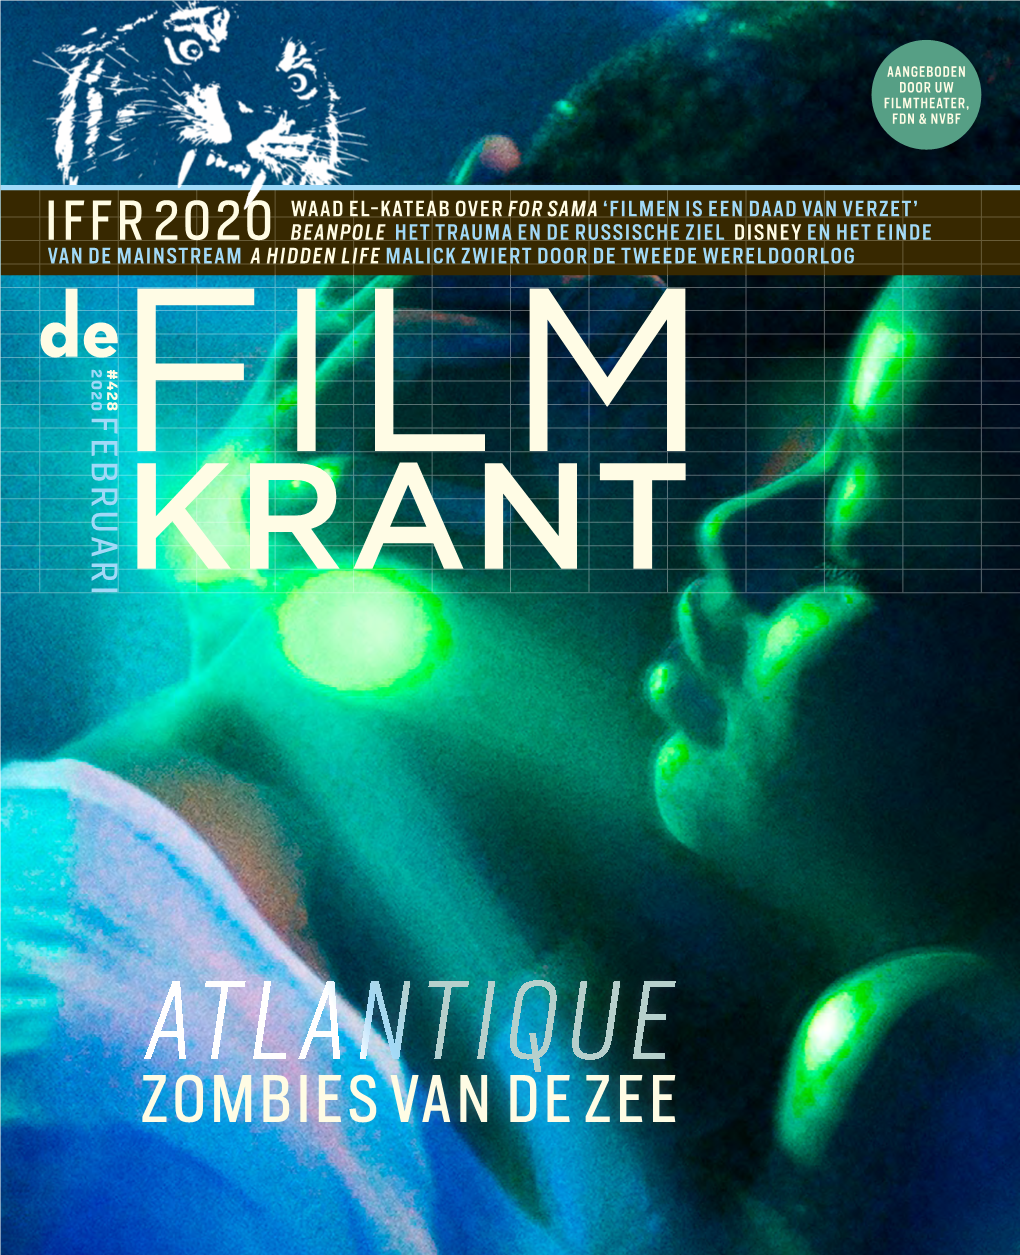 ZOMBIES VAN DE ZEE “A Harrowing Tale and Lovely Acted Film, Set During the Algerian Civil War” Hollywood Reporter